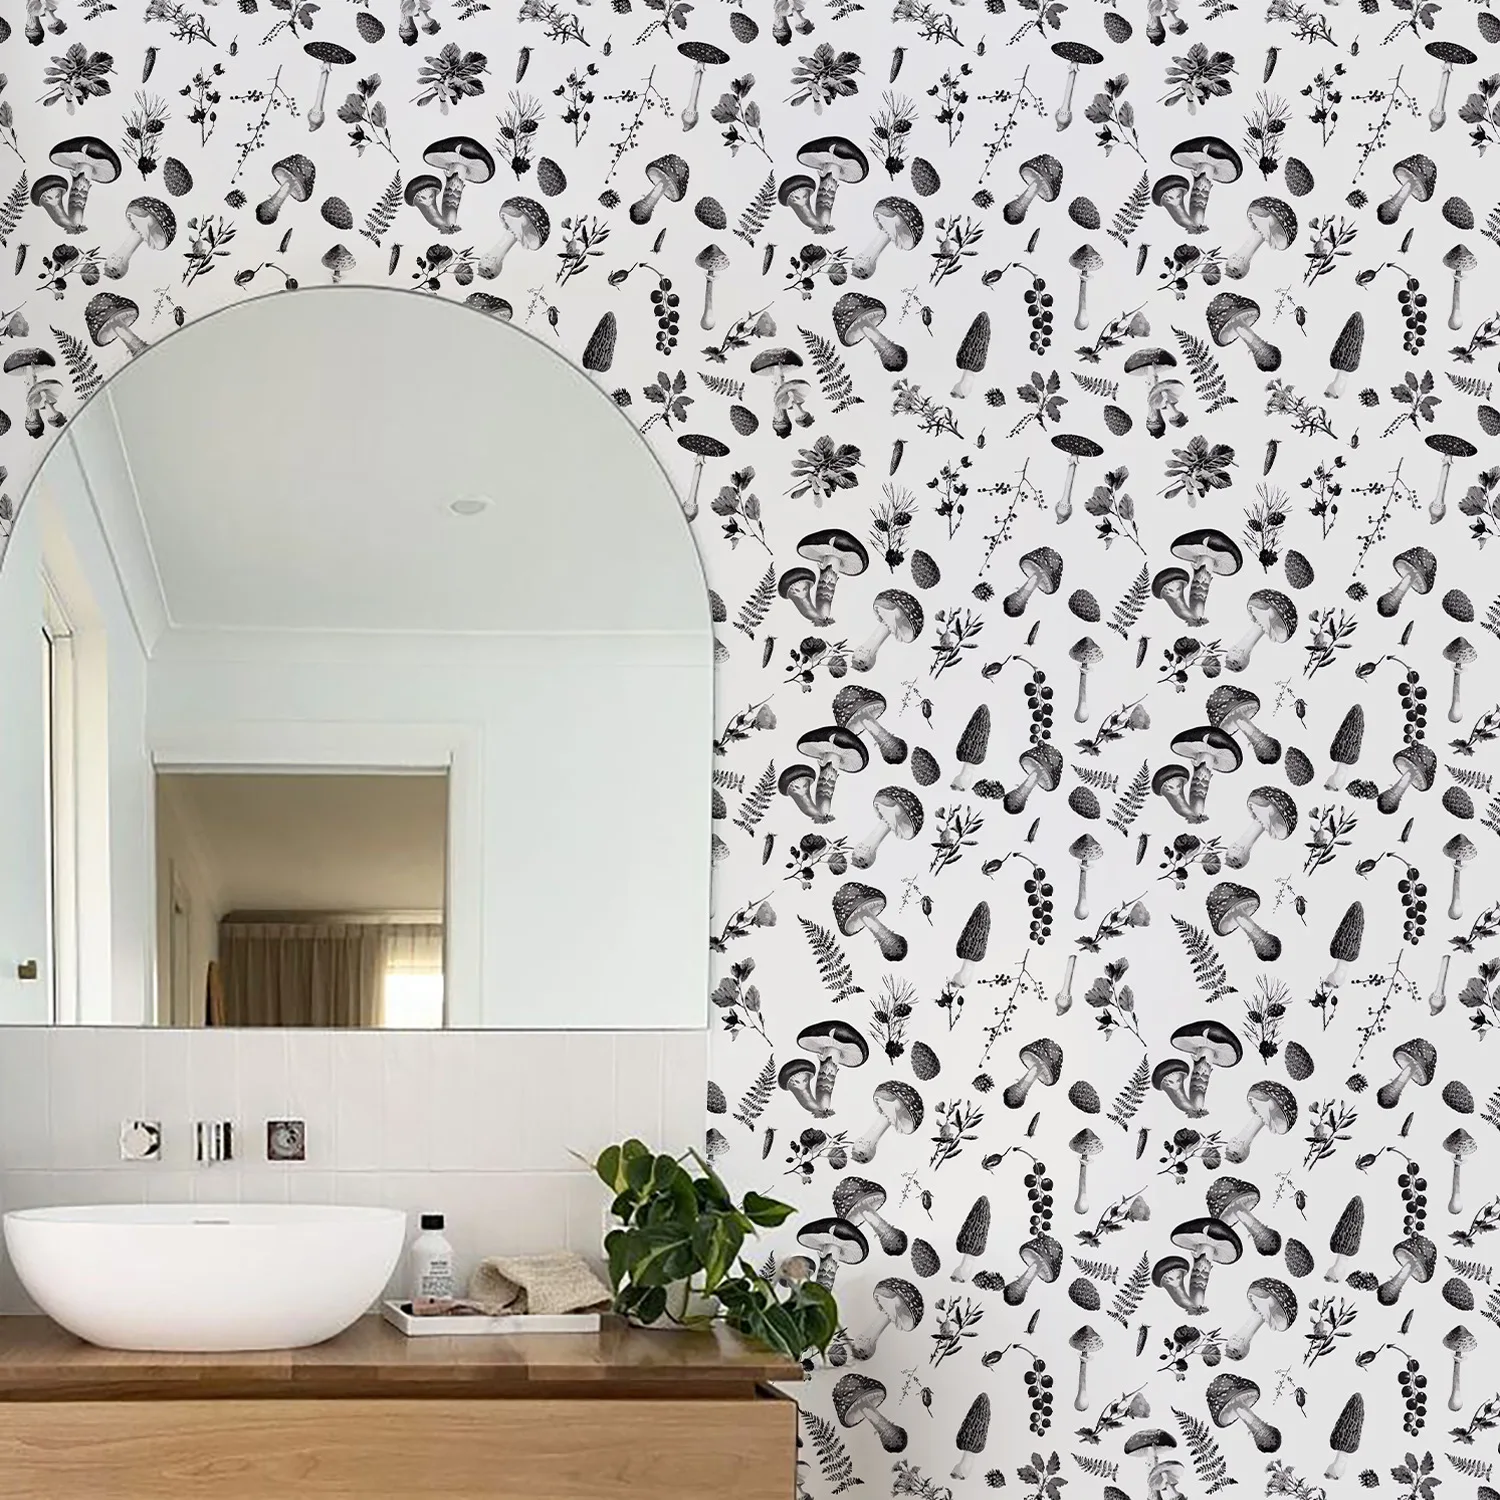 

Forest Peel and Stick Wallpaper Black White Floral Mushroom Self Adhesive Wallpaper for Kids Bedroom Wall Nursery Decor